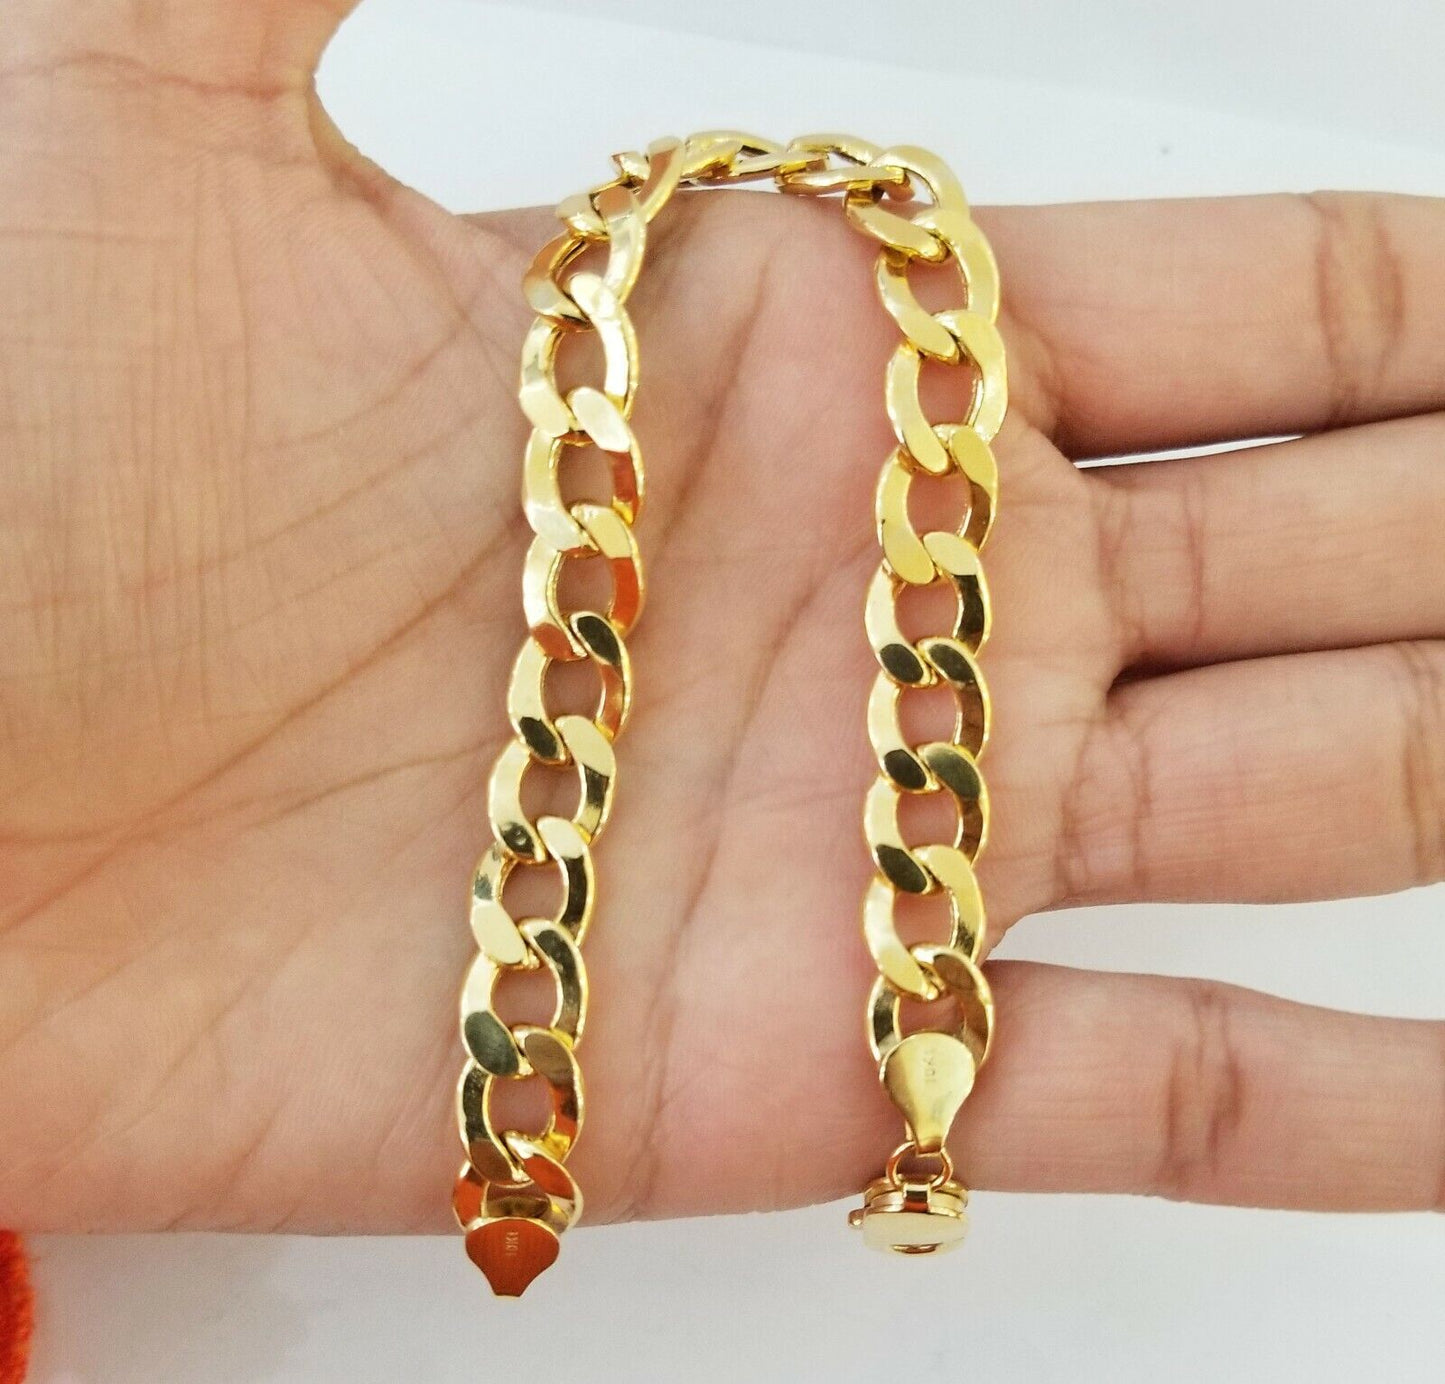 10k Yellow Gold Cuban Link Bracelet 10mm Link 8 inch  Real gold hand chain 10kt